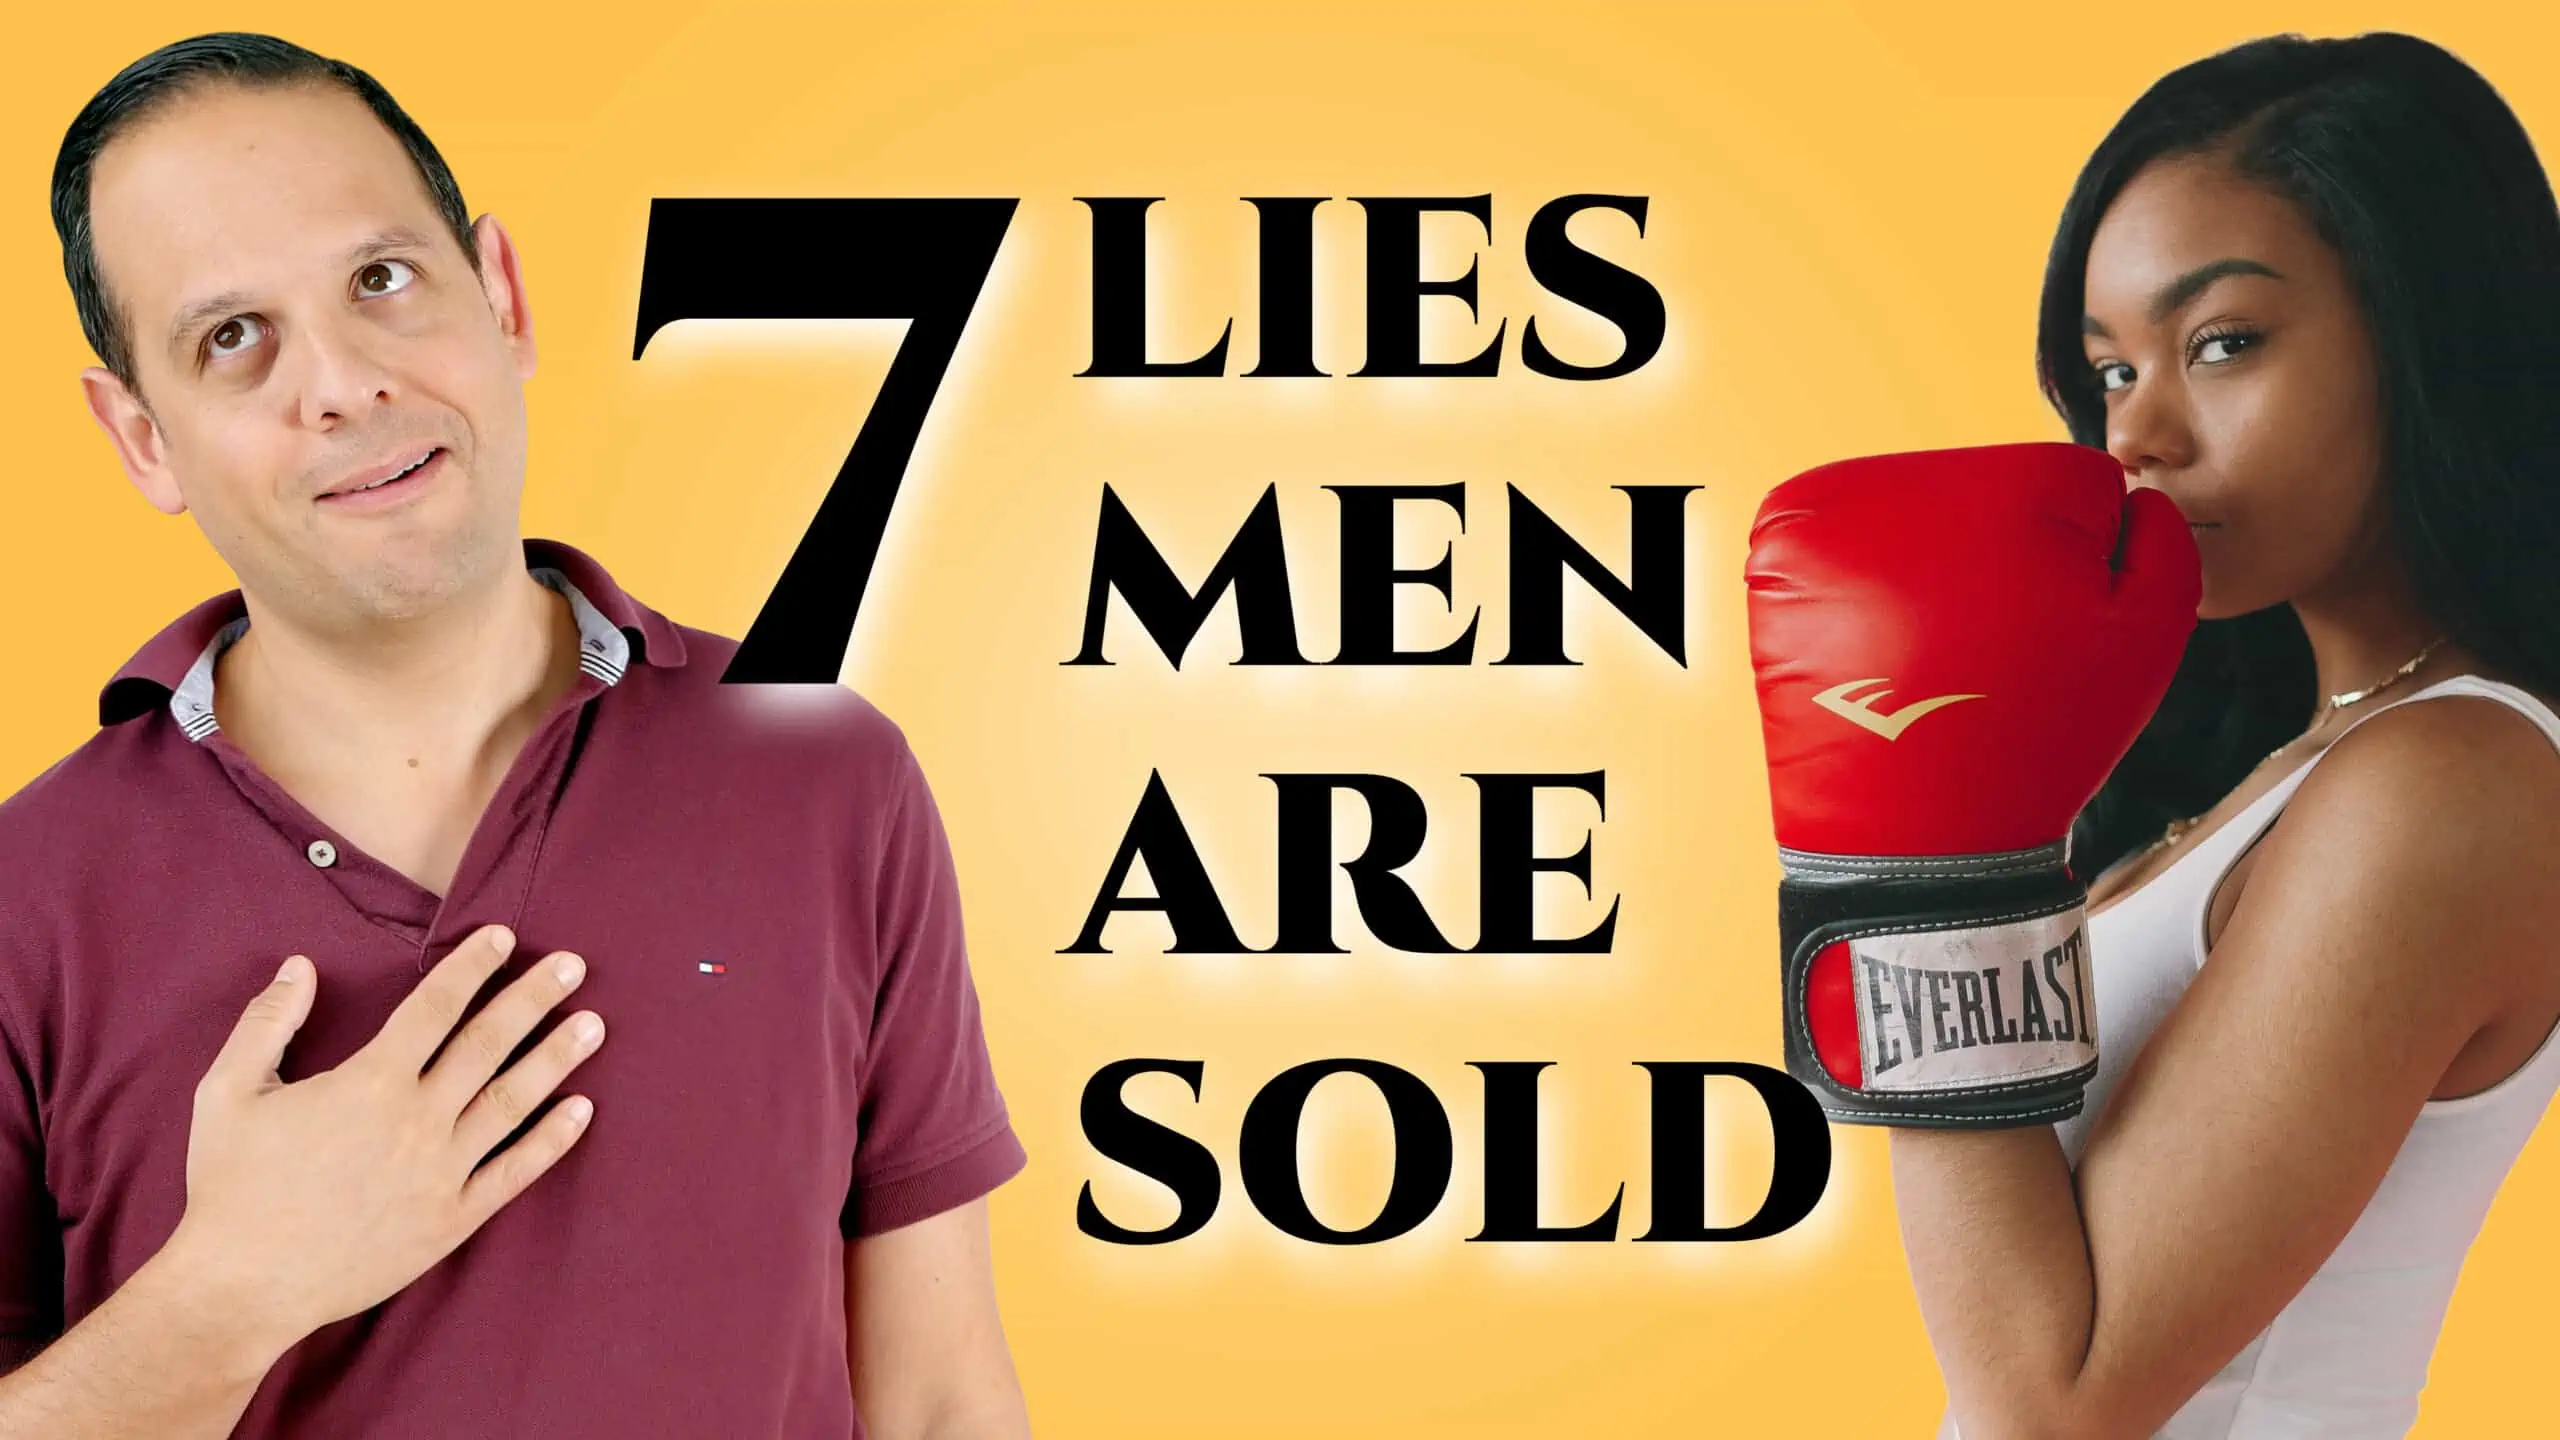 7 lies men are sold 3840x2160 scaled